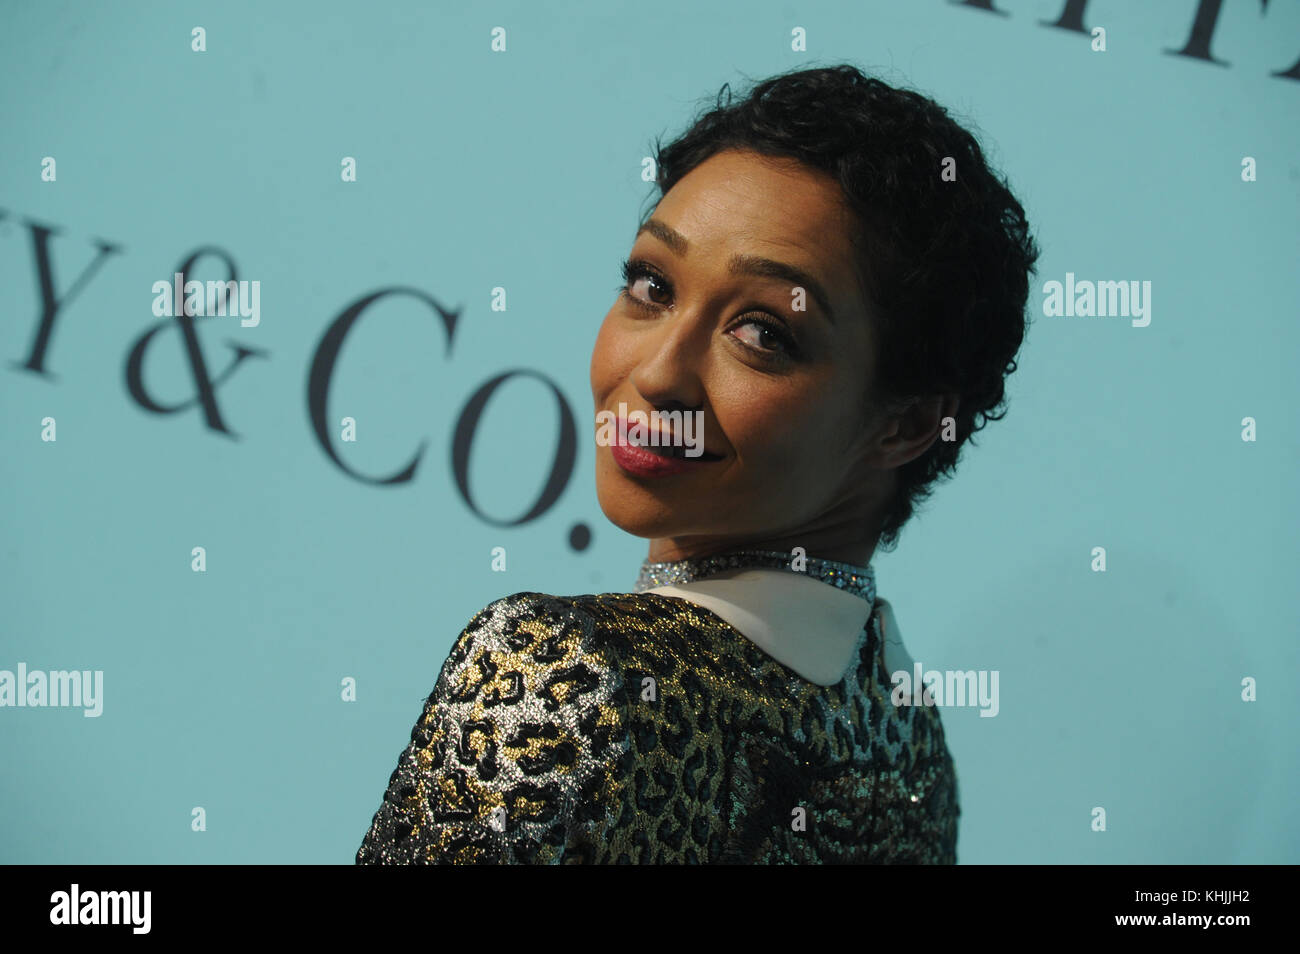 New York, NY - 21. April: Ruth negga besucht Tiffany & Co 2017 Blue book collection Gala im st.ann Lager am 21. April 2017 in New York City People: Ruth negga Getriebe Ref: mnc1 Stockfoto